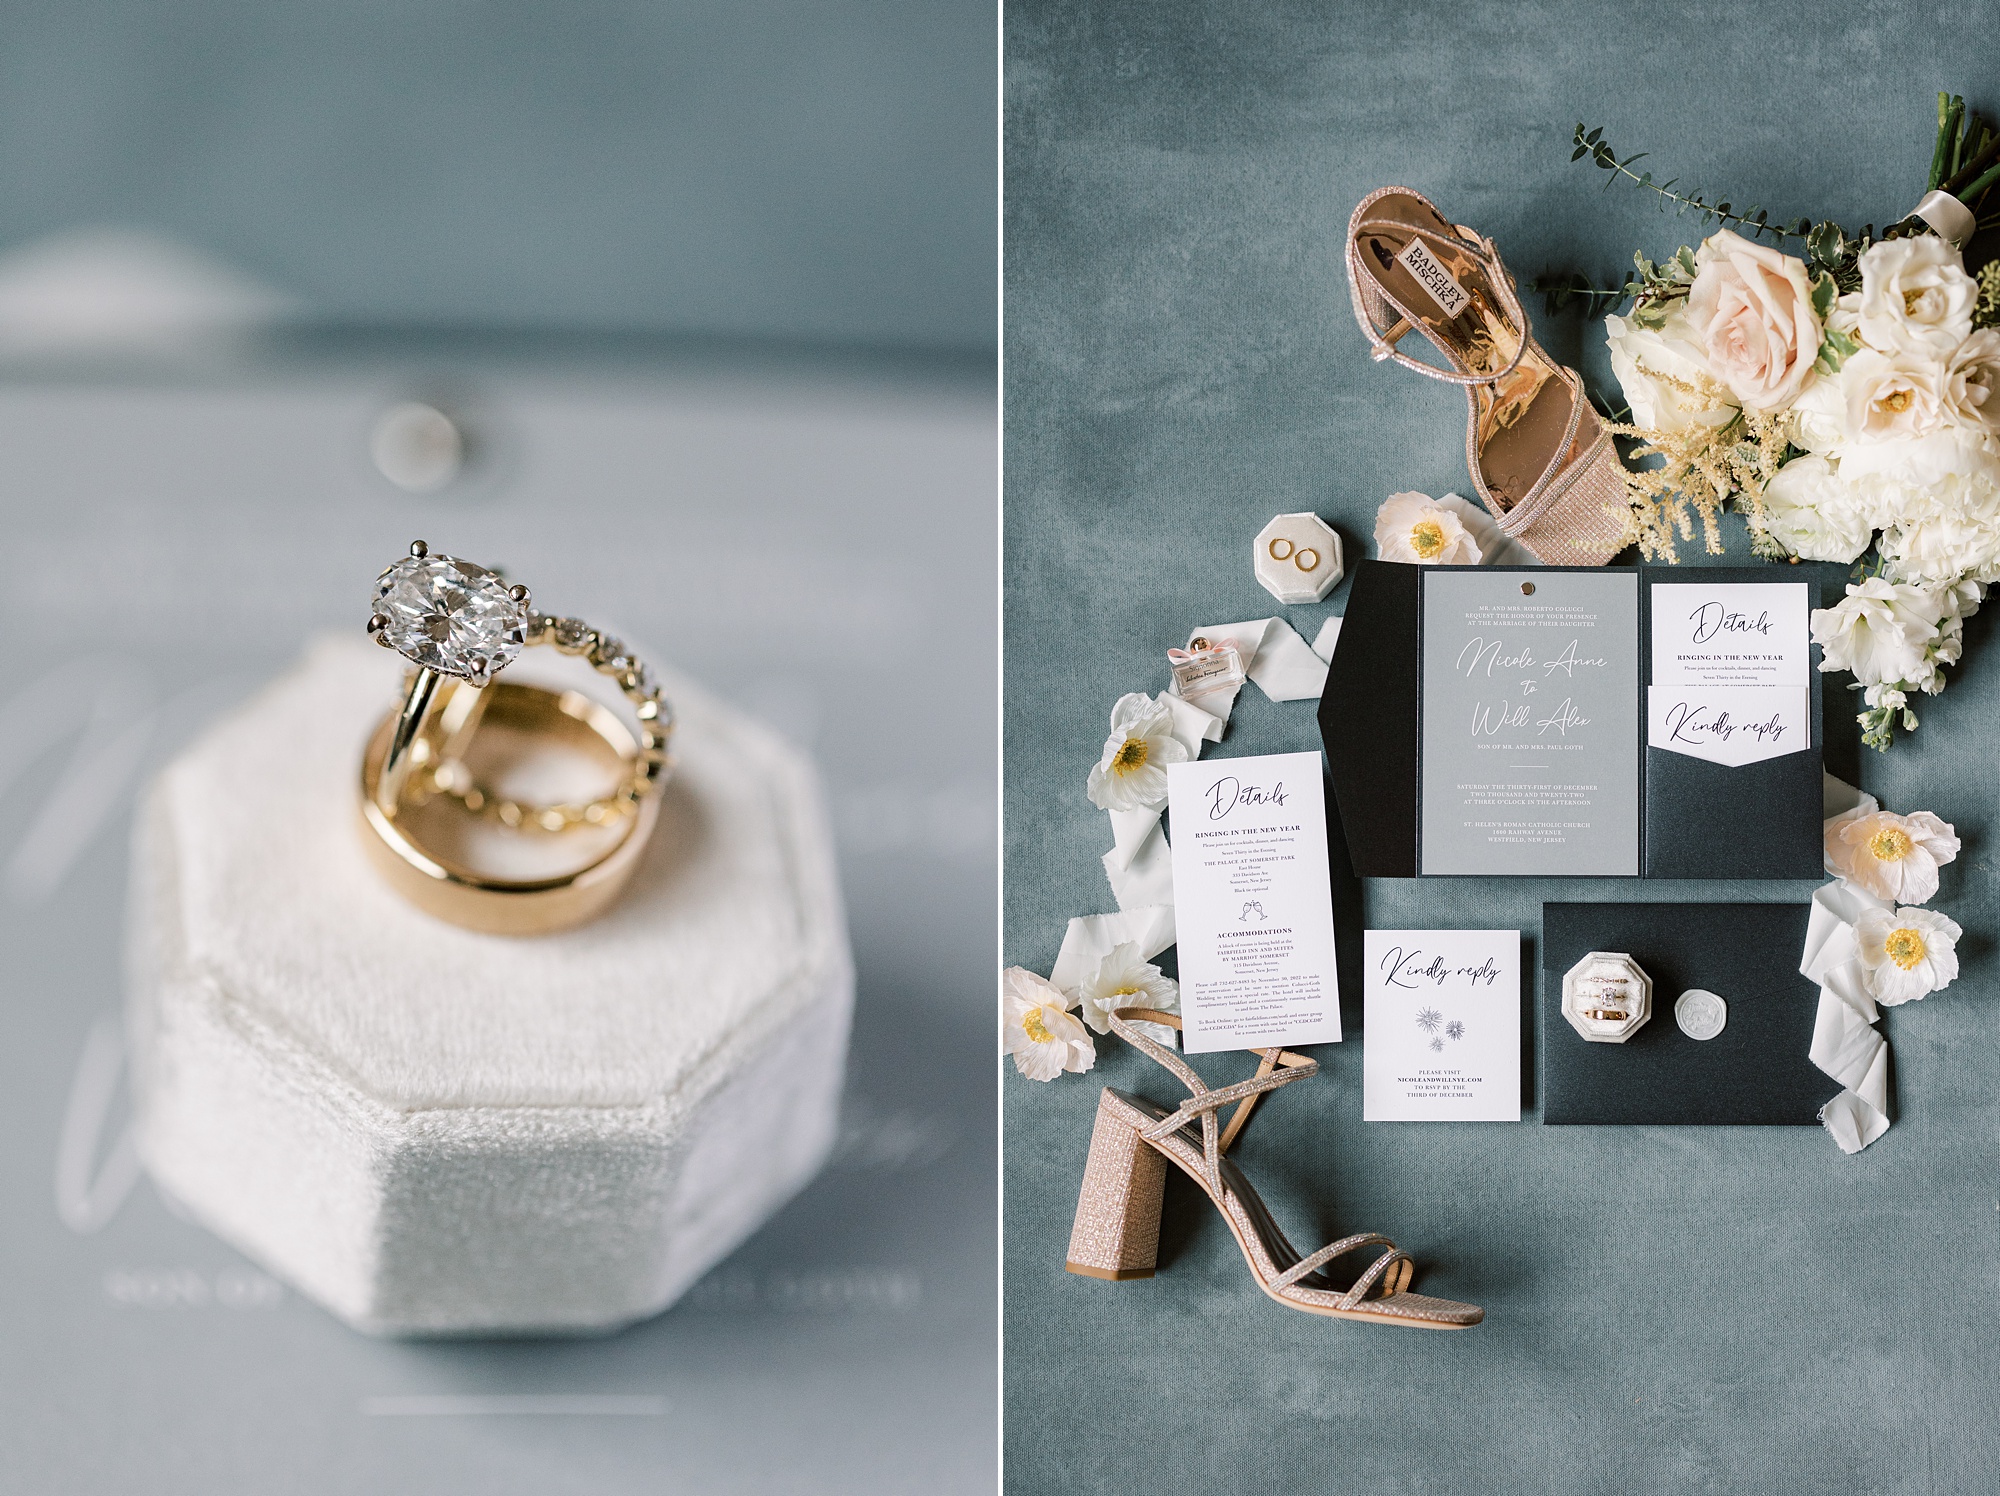 bride's gold ring rests on white ring box